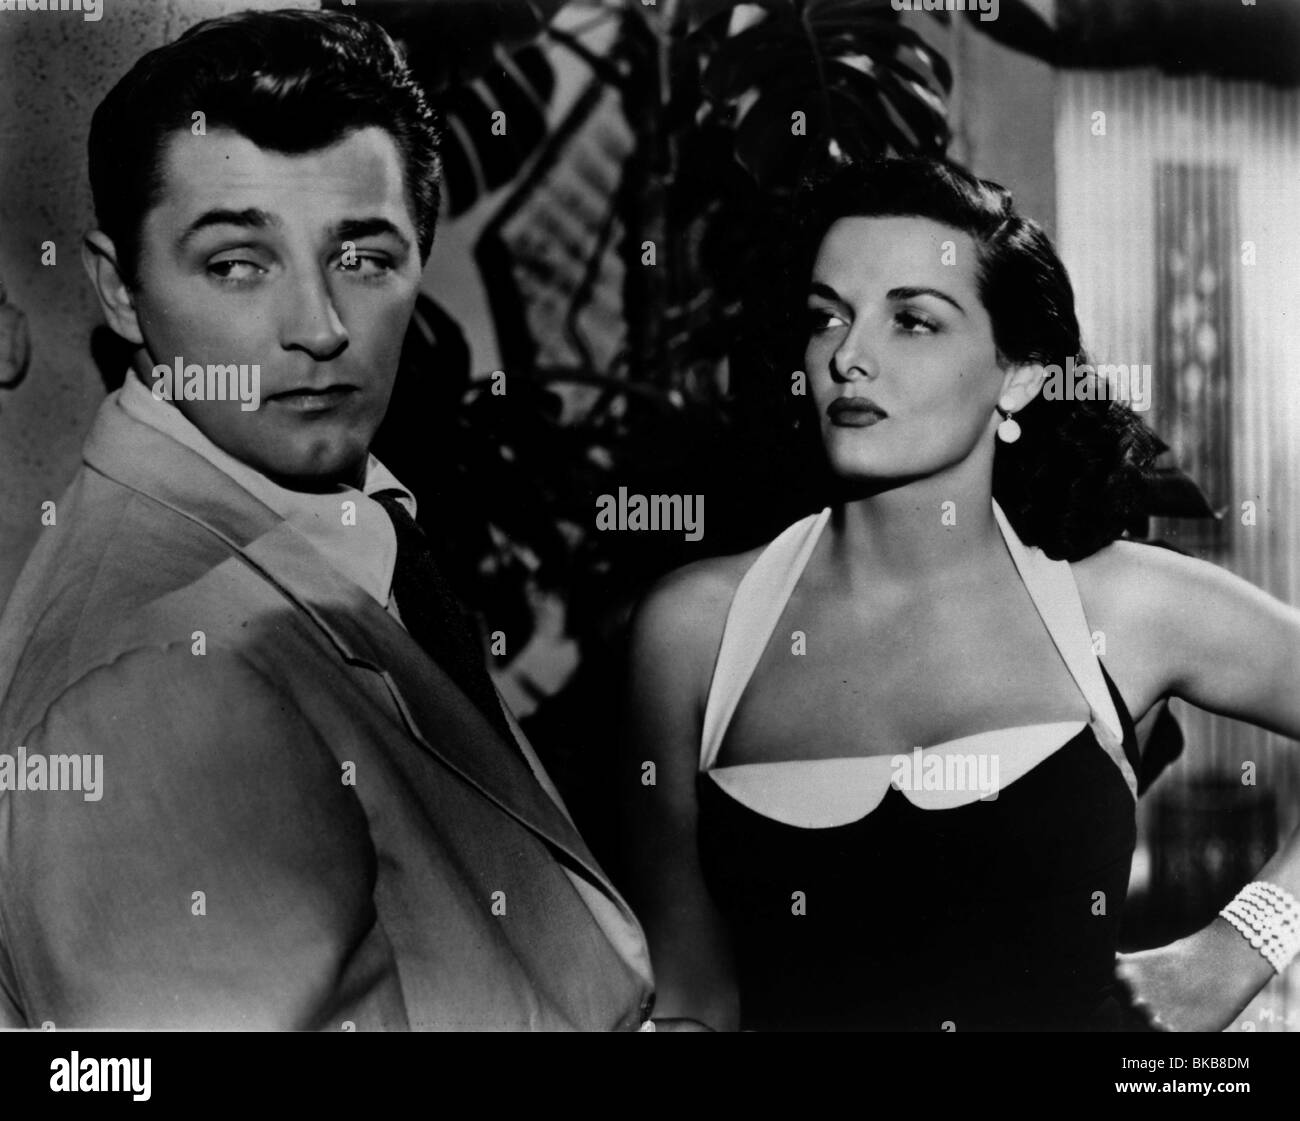 HIS KIND OF WOMAN (1951) ROBERT MITCHUM, JANE RUSSELL HKWM 001P Stock Photo  - Alamy